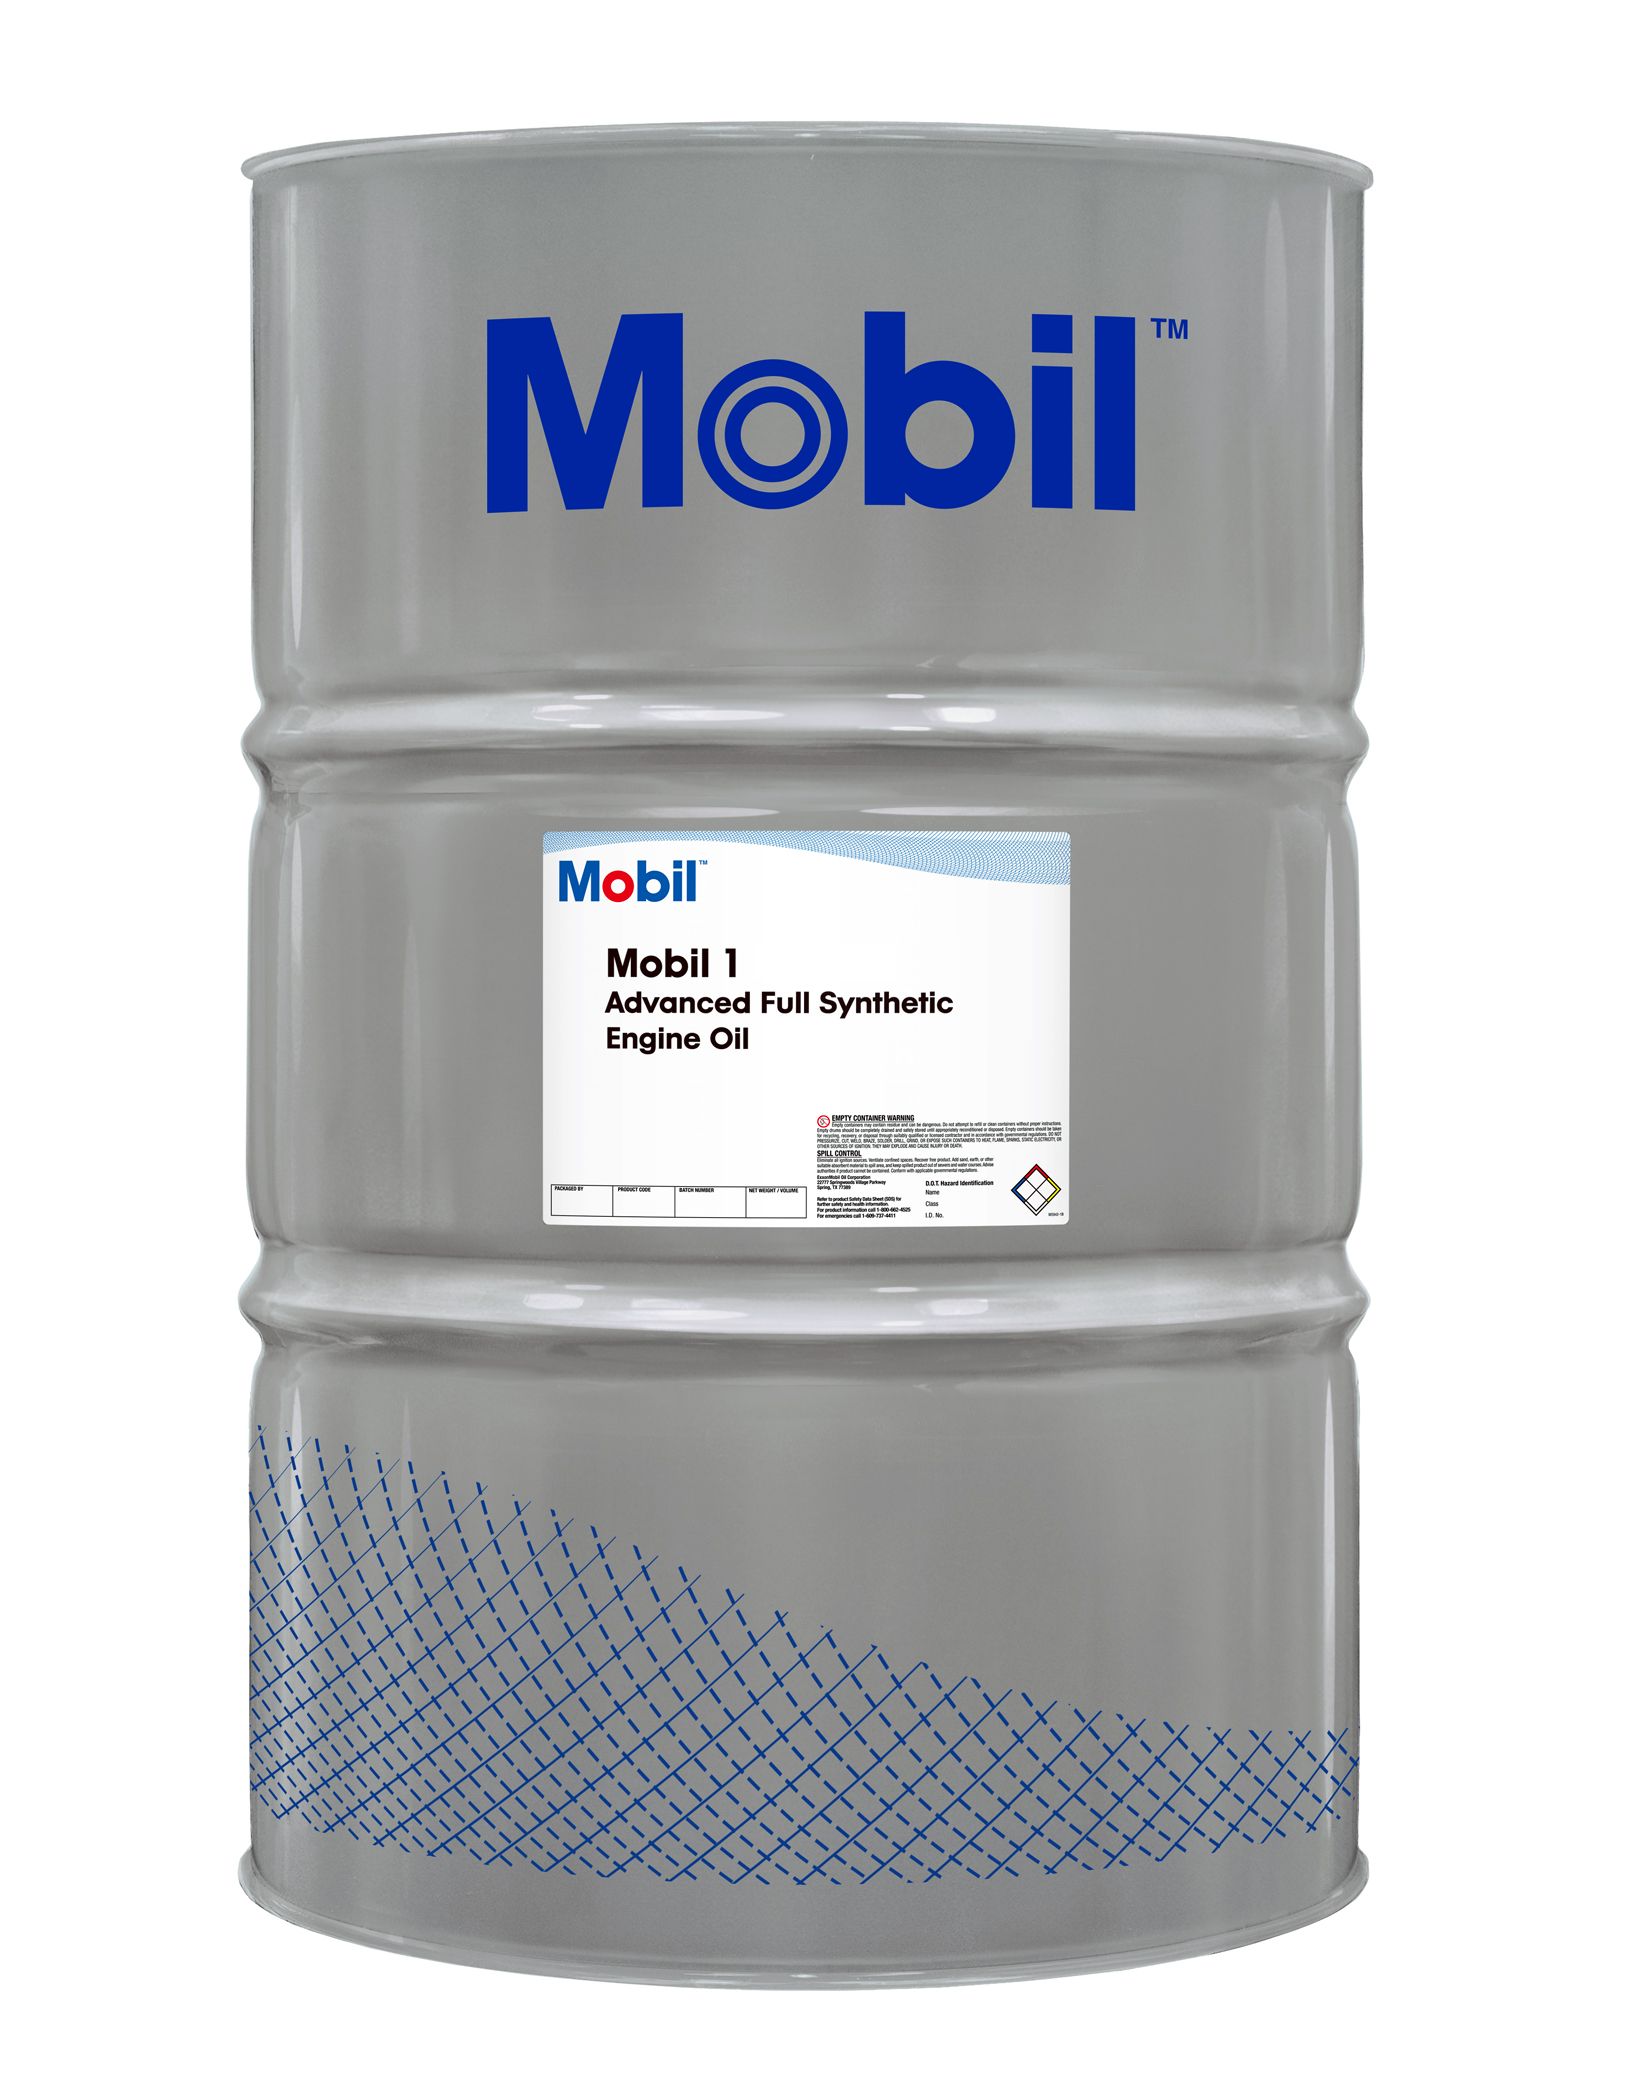 MOBIL 1 10W-30 100% SYNTHETIC, 55 Gallon Drum